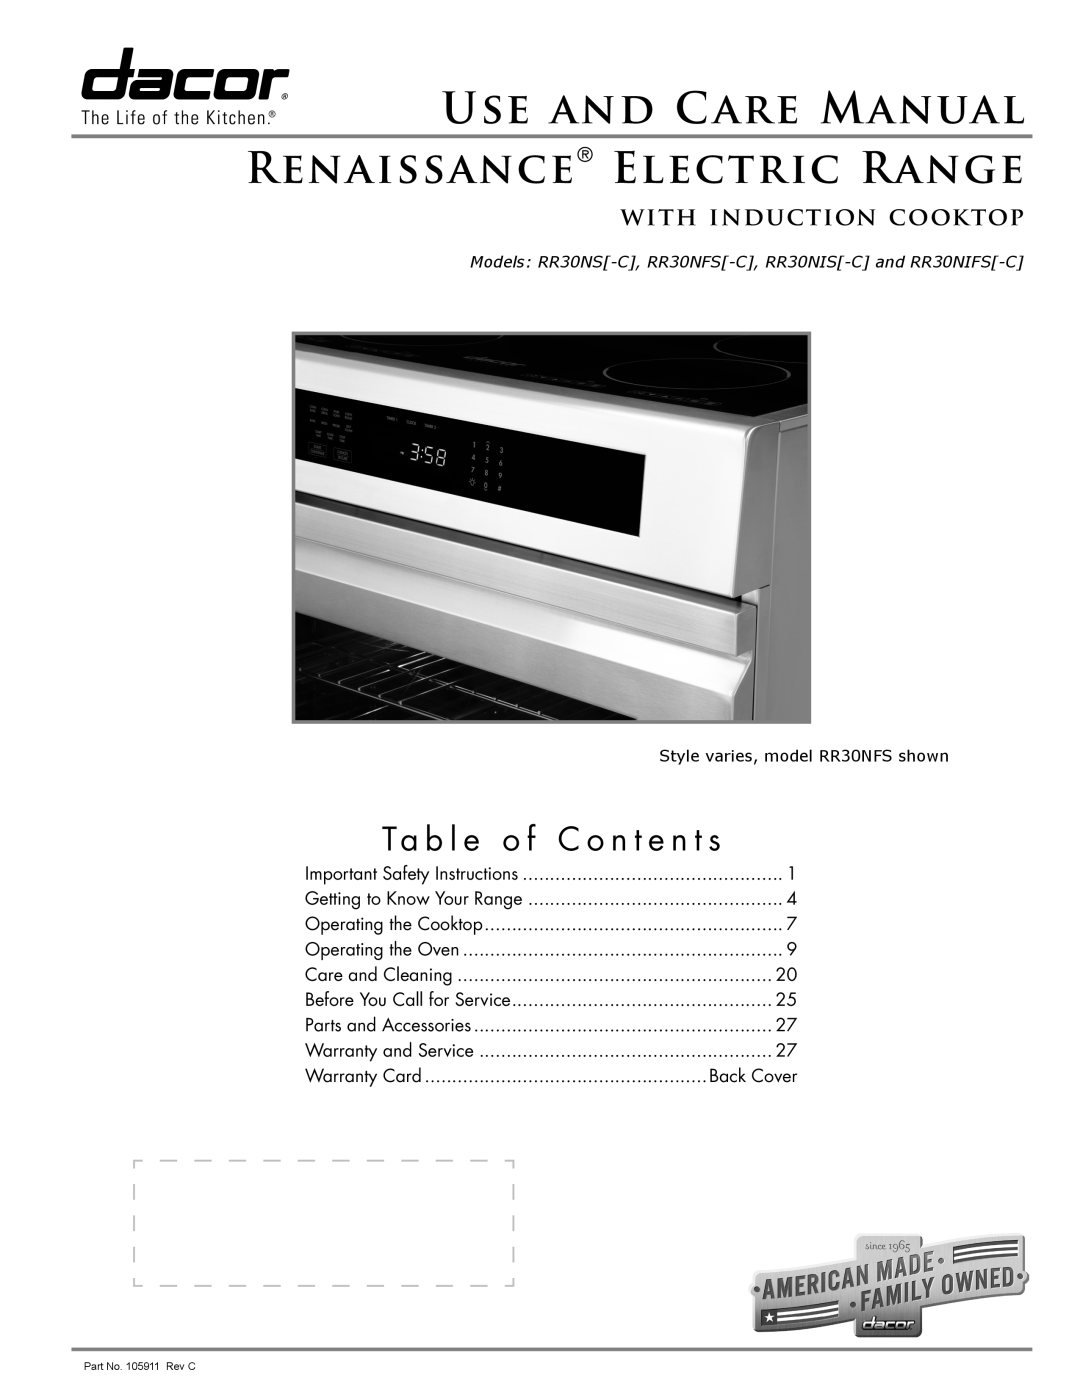 Dacor dacor important safety instructions Ta b l e o f C o n t e n t s, Use And Care Manual Renaissance Electric Range 